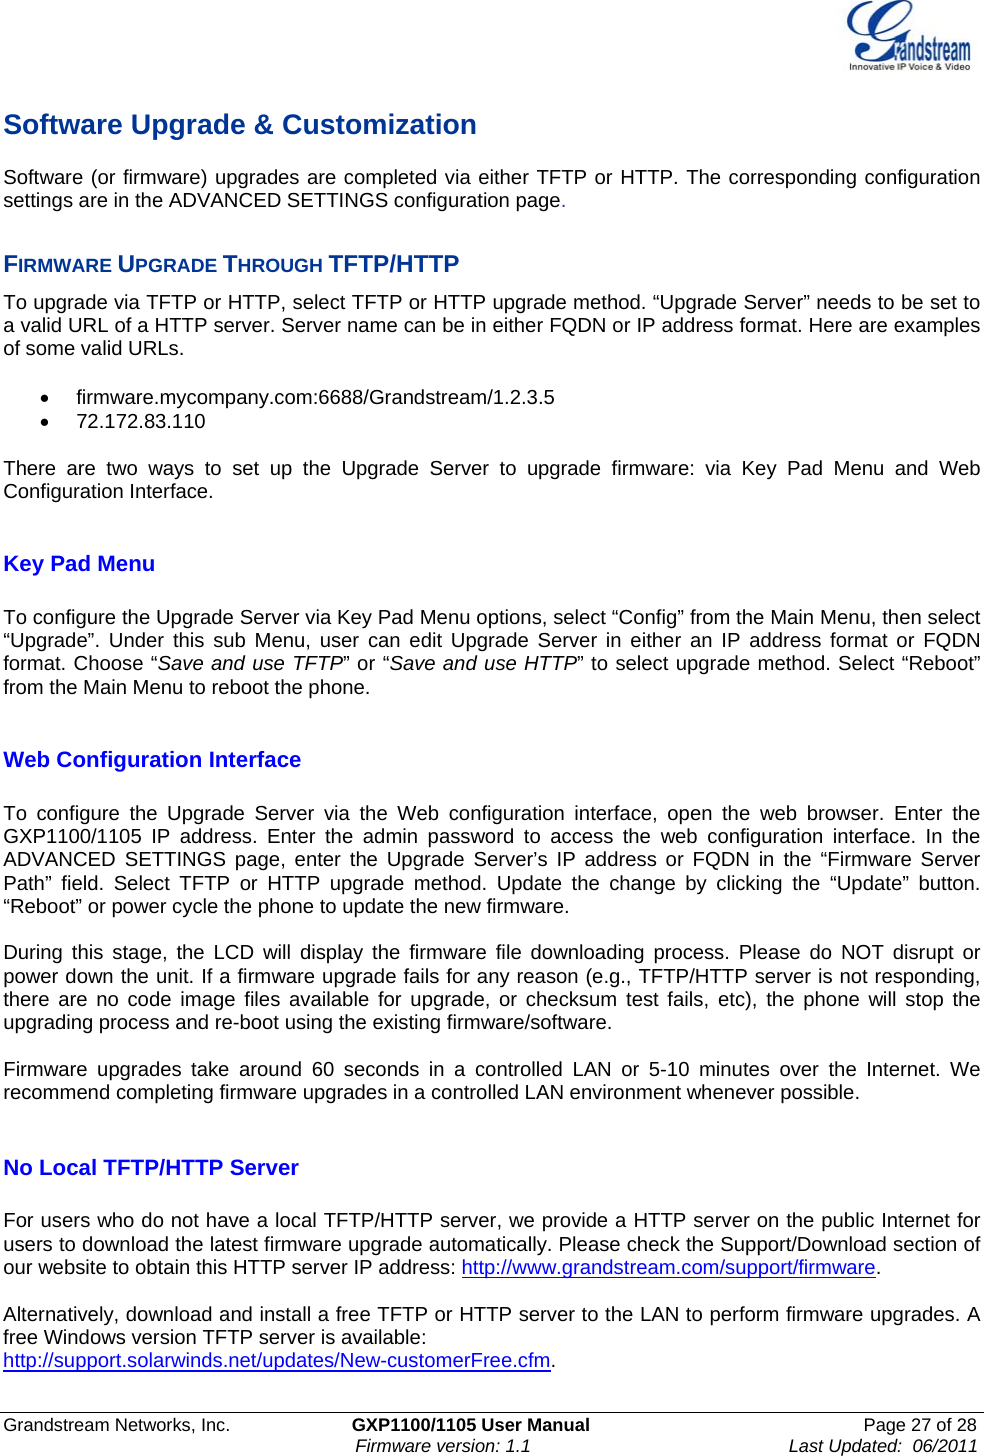    Grandstream Networks, Inc.                        GXP1100/1105 User Manual                                                      Page 27 of 28                                                                      Firmware version: 1.1                                                   Last Updated:  06/2011  Software Upgrade &amp; Customization Software (or firmware) upgrades are completed via either TFTP or HTTP. The corresponding configuration settings are in the ADVANCED SETTINGS configuration page.   FIRMWARE UPGRADE THROUGH TFTP/HTTP To upgrade via TFTP or HTTP, select TFTP or HTTP upgrade method. “Upgrade Server” needs to be set to a valid URL of a HTTP server. Server name can be in either FQDN or IP address format. Here are examples of some valid URLs.   • firmware.mycompany.com:6688/Grandstream/1.2.3.5 • 72.172.83.110    There are two ways to set up the Upgrade Server to upgrade firmware: via Key Pad Menu and Web Configuration Interface.  Key Pad Menu        To configure the Upgrade Server via Key Pad Menu options, select “Config” from the Main Menu, then select “Upgrade”. Under this sub Menu, user can edit Upgrade Server in either an IP address format or FQDN format. Choose “Save and use TFTP” or “Save and use HTTP” to select upgrade method. Select “Reboot” from the Main Menu to reboot the phone.  Web Configuration Interface  To configure the Upgrade Server via the Web configuration interface, open the web browser. Enter the GXP1100/1105 IP address. Enter the admin password to access the web configuration interface. In the ADVANCED SETTINGS page, enter the Upgrade Server’s IP address or FQDN in the “Firmware Server Path” field. Select TFTP or HTTP upgrade method. Update the change by clicking the “Update” button. “Reboot” or power cycle the phone to update the new firmware.   During this stage, the LCD will display the firmware file downloading process. Please do NOT disrupt or power down the unit. If a firmware upgrade fails for any reason (e.g., TFTP/HTTP server is not responding, there are no code image files available for upgrade, or checksum test fails, etc), the phone will stop the upgrading process and re-boot using the existing firmware/software.  Firmware upgrades take around 60 seconds in a controlled LAN or 5-10 minutes over the Internet. We recommend completing firmware upgrades in a controlled LAN environment whenever possible.   No Local TFTP/HTTP Server  For users who do not have a local TFTP/HTTP server, we provide a HTTP server on the public Internet for users to download the latest firmware upgrade automatically. Please check the Support/Download section of our website to obtain this HTTP server IP address: http://www.grandstream.com/support/firmware.  Alternatively, download and install a free TFTP or HTTP server to the LAN to perform firmware upgrades. A free Windows version TFTP server is available:   http://support.solarwinds.net/updates/New-customerFree.cfm.  